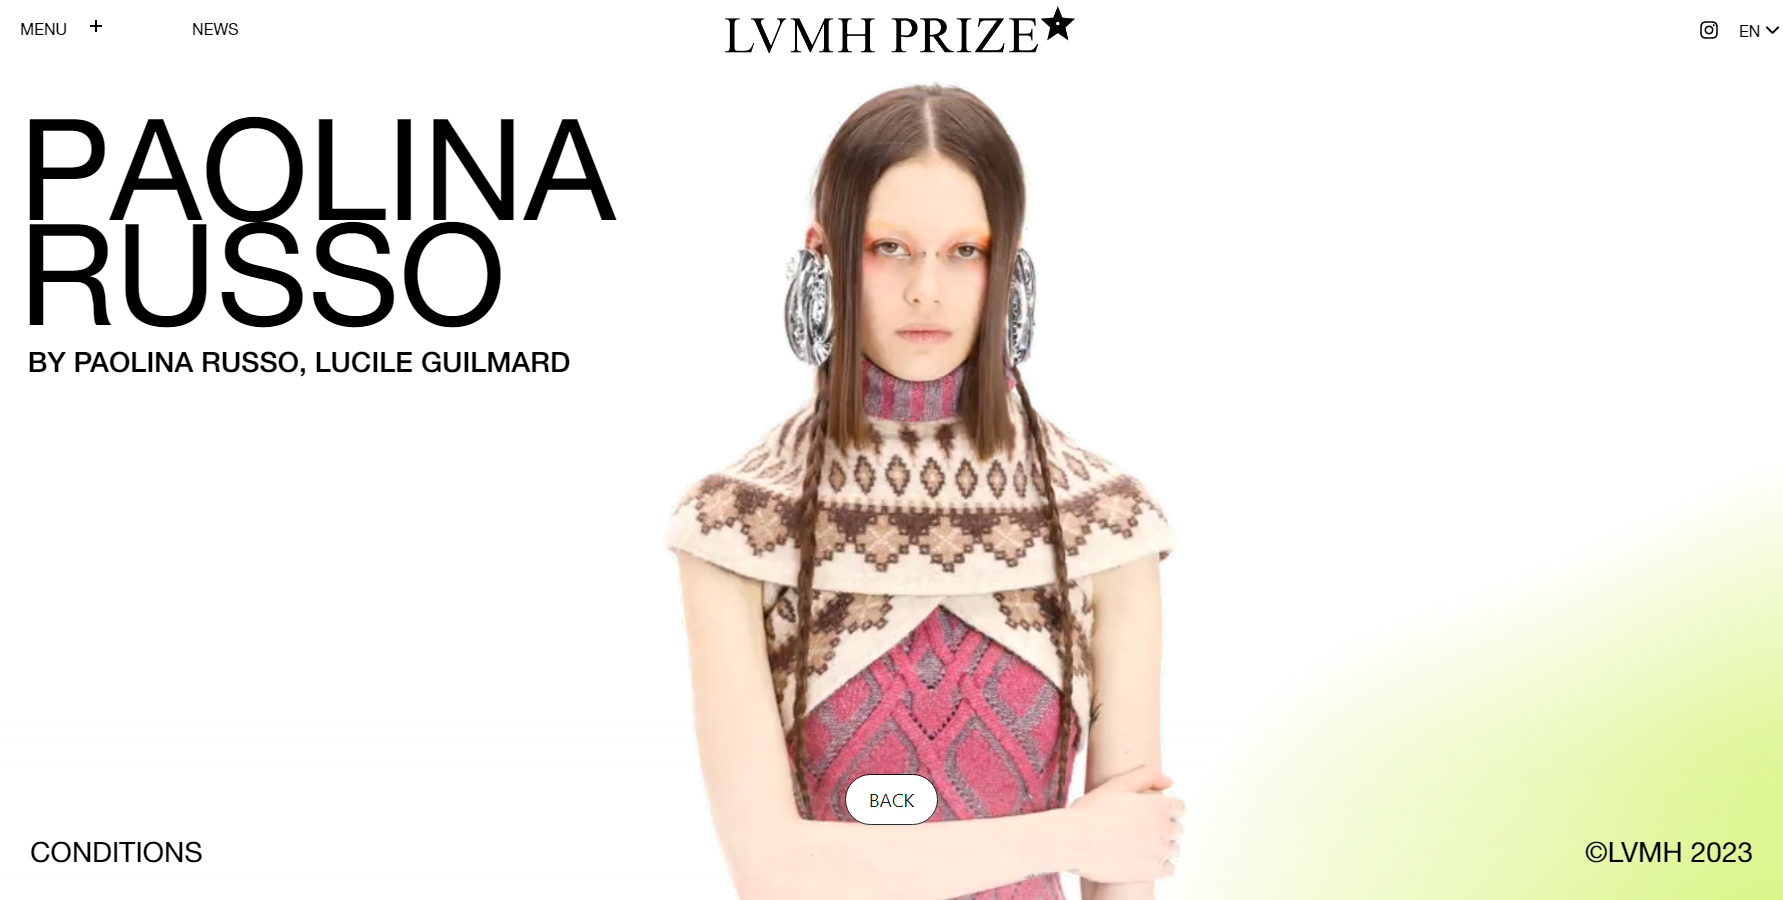 LVMH Prize - Website of the Month